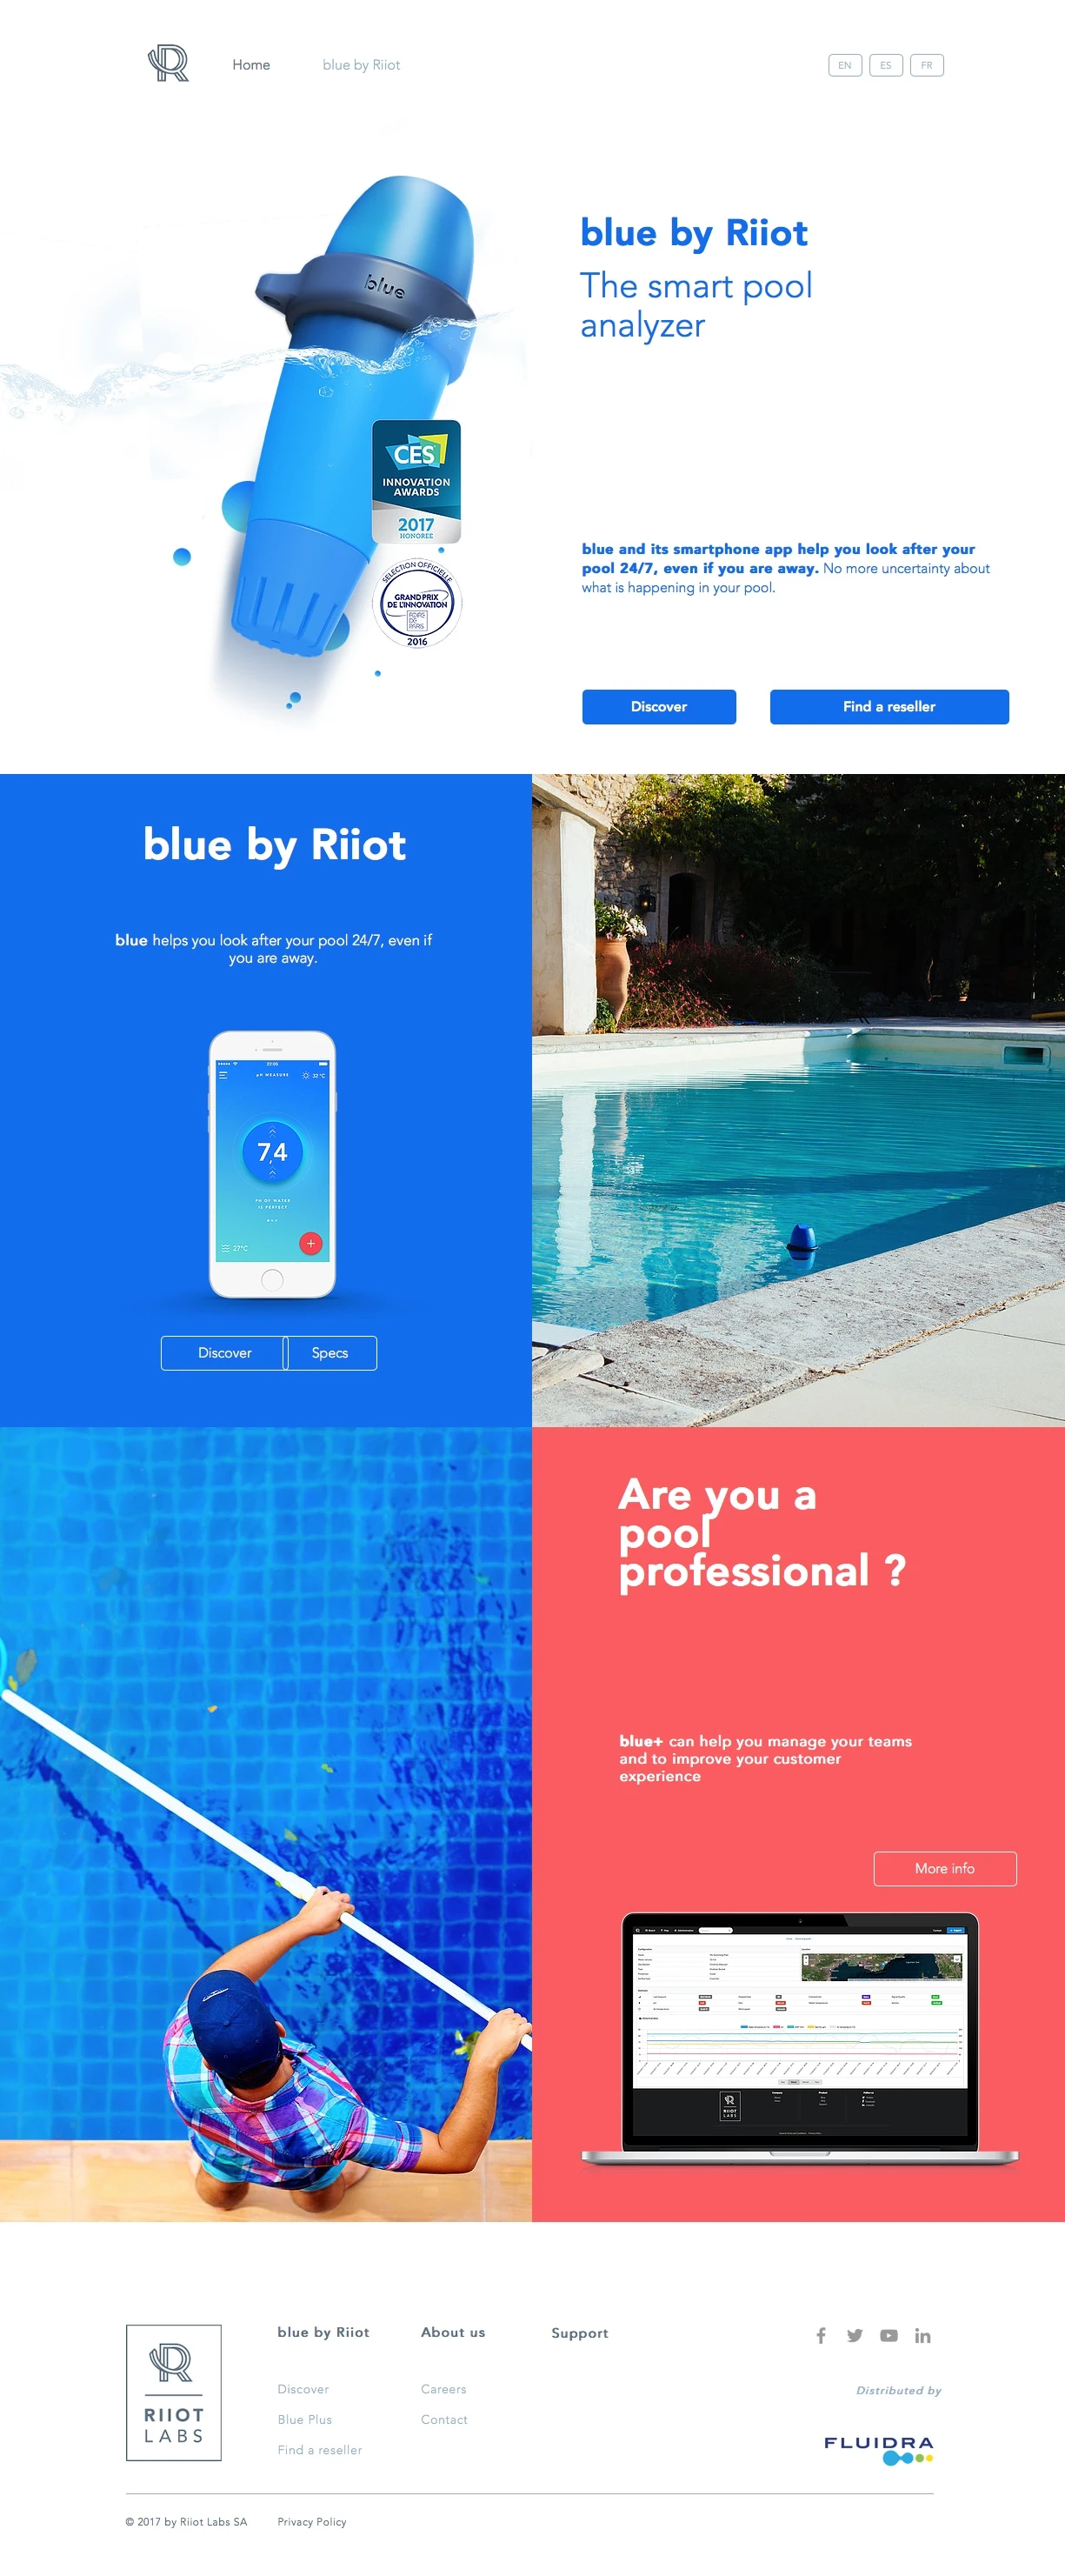 Riiot Labs Landing Page Example: Blue by Riiot, The smart pool analyzer